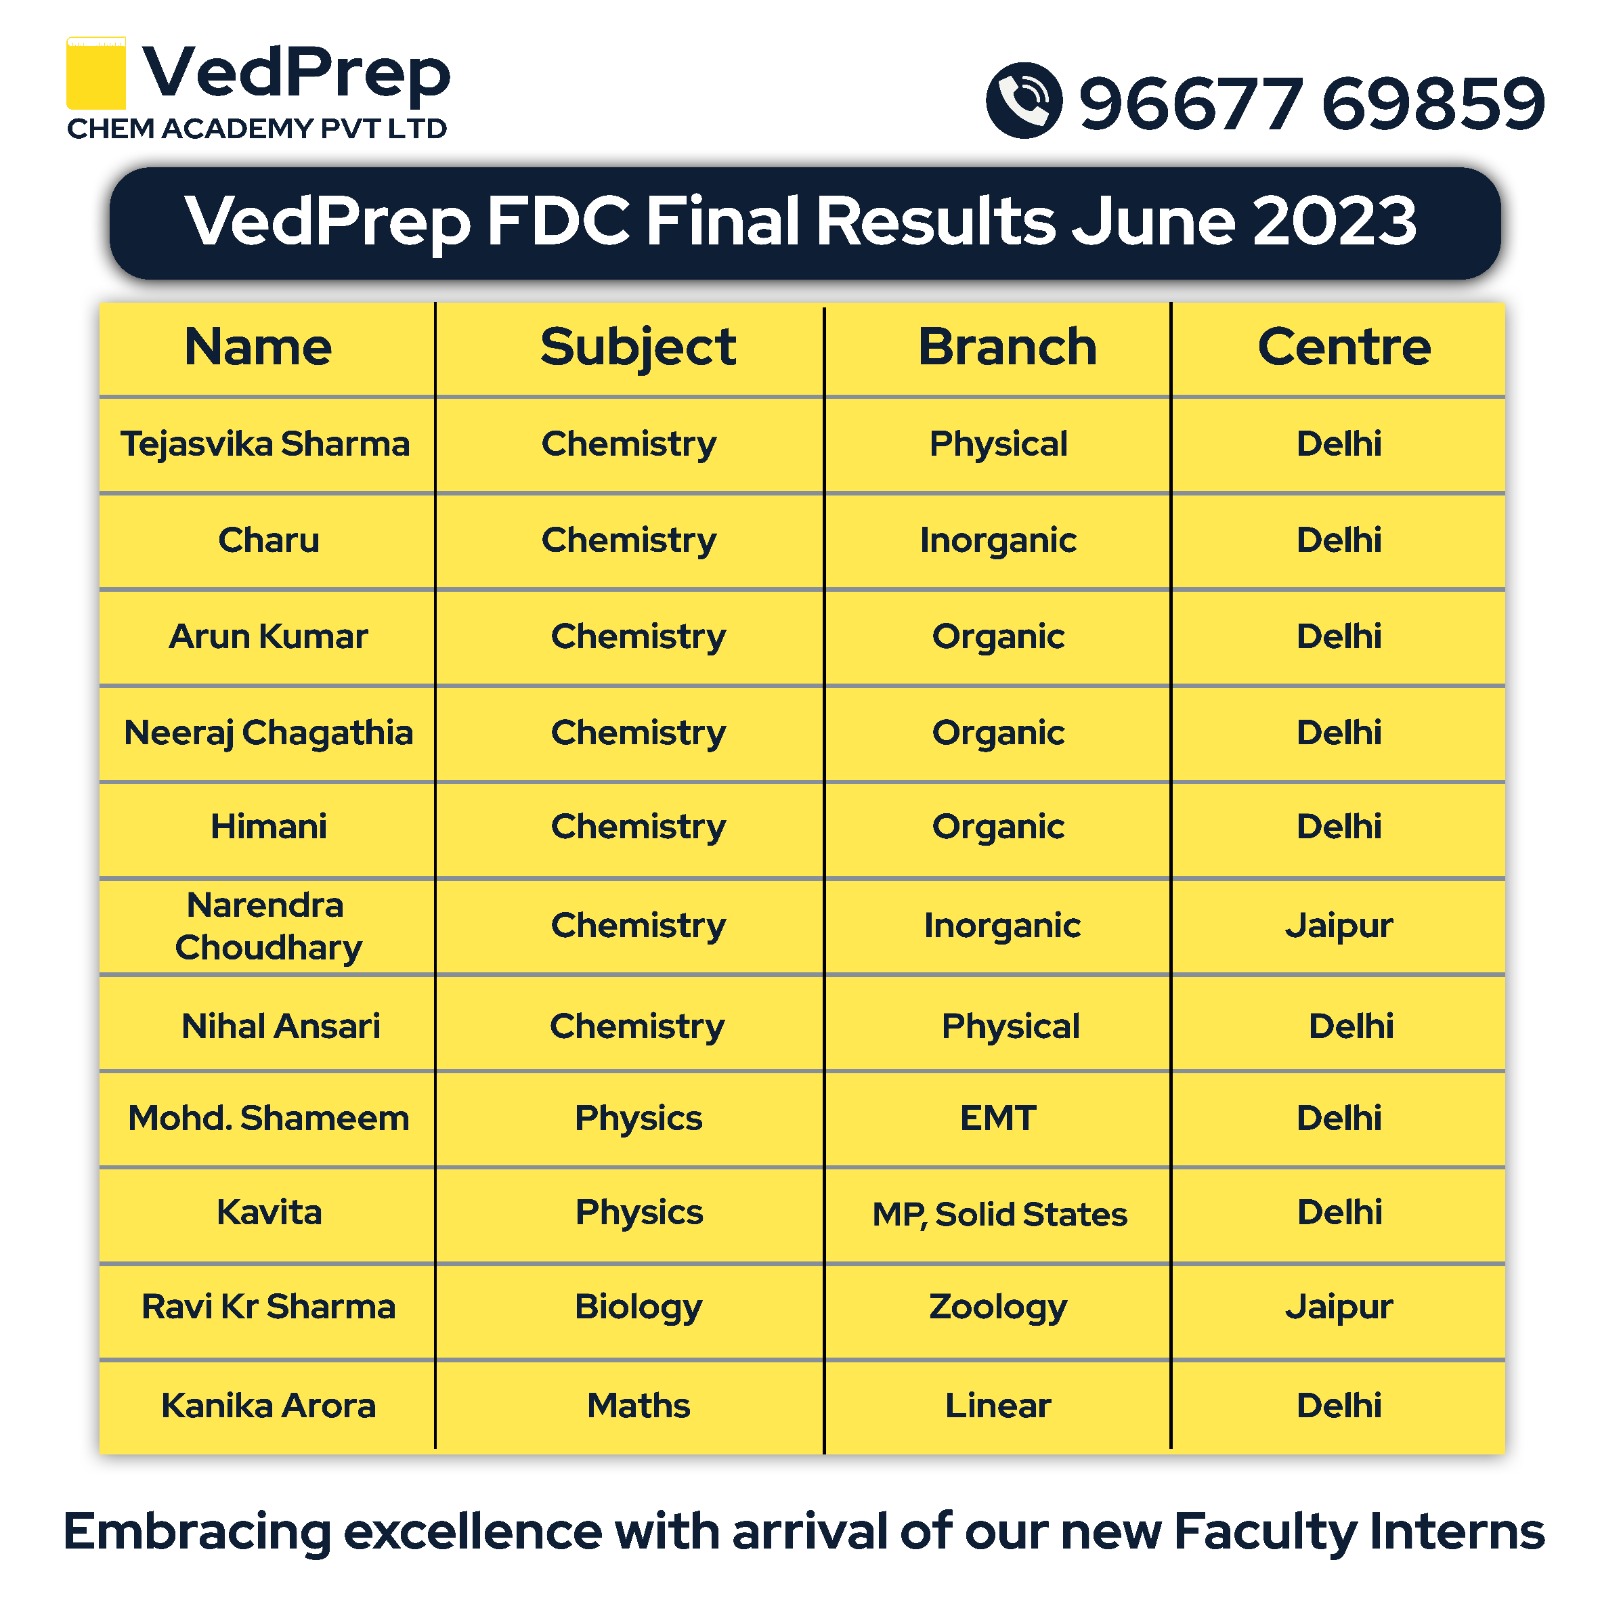 Vedprep FDC Final Results are Out! Meet Our New Educators